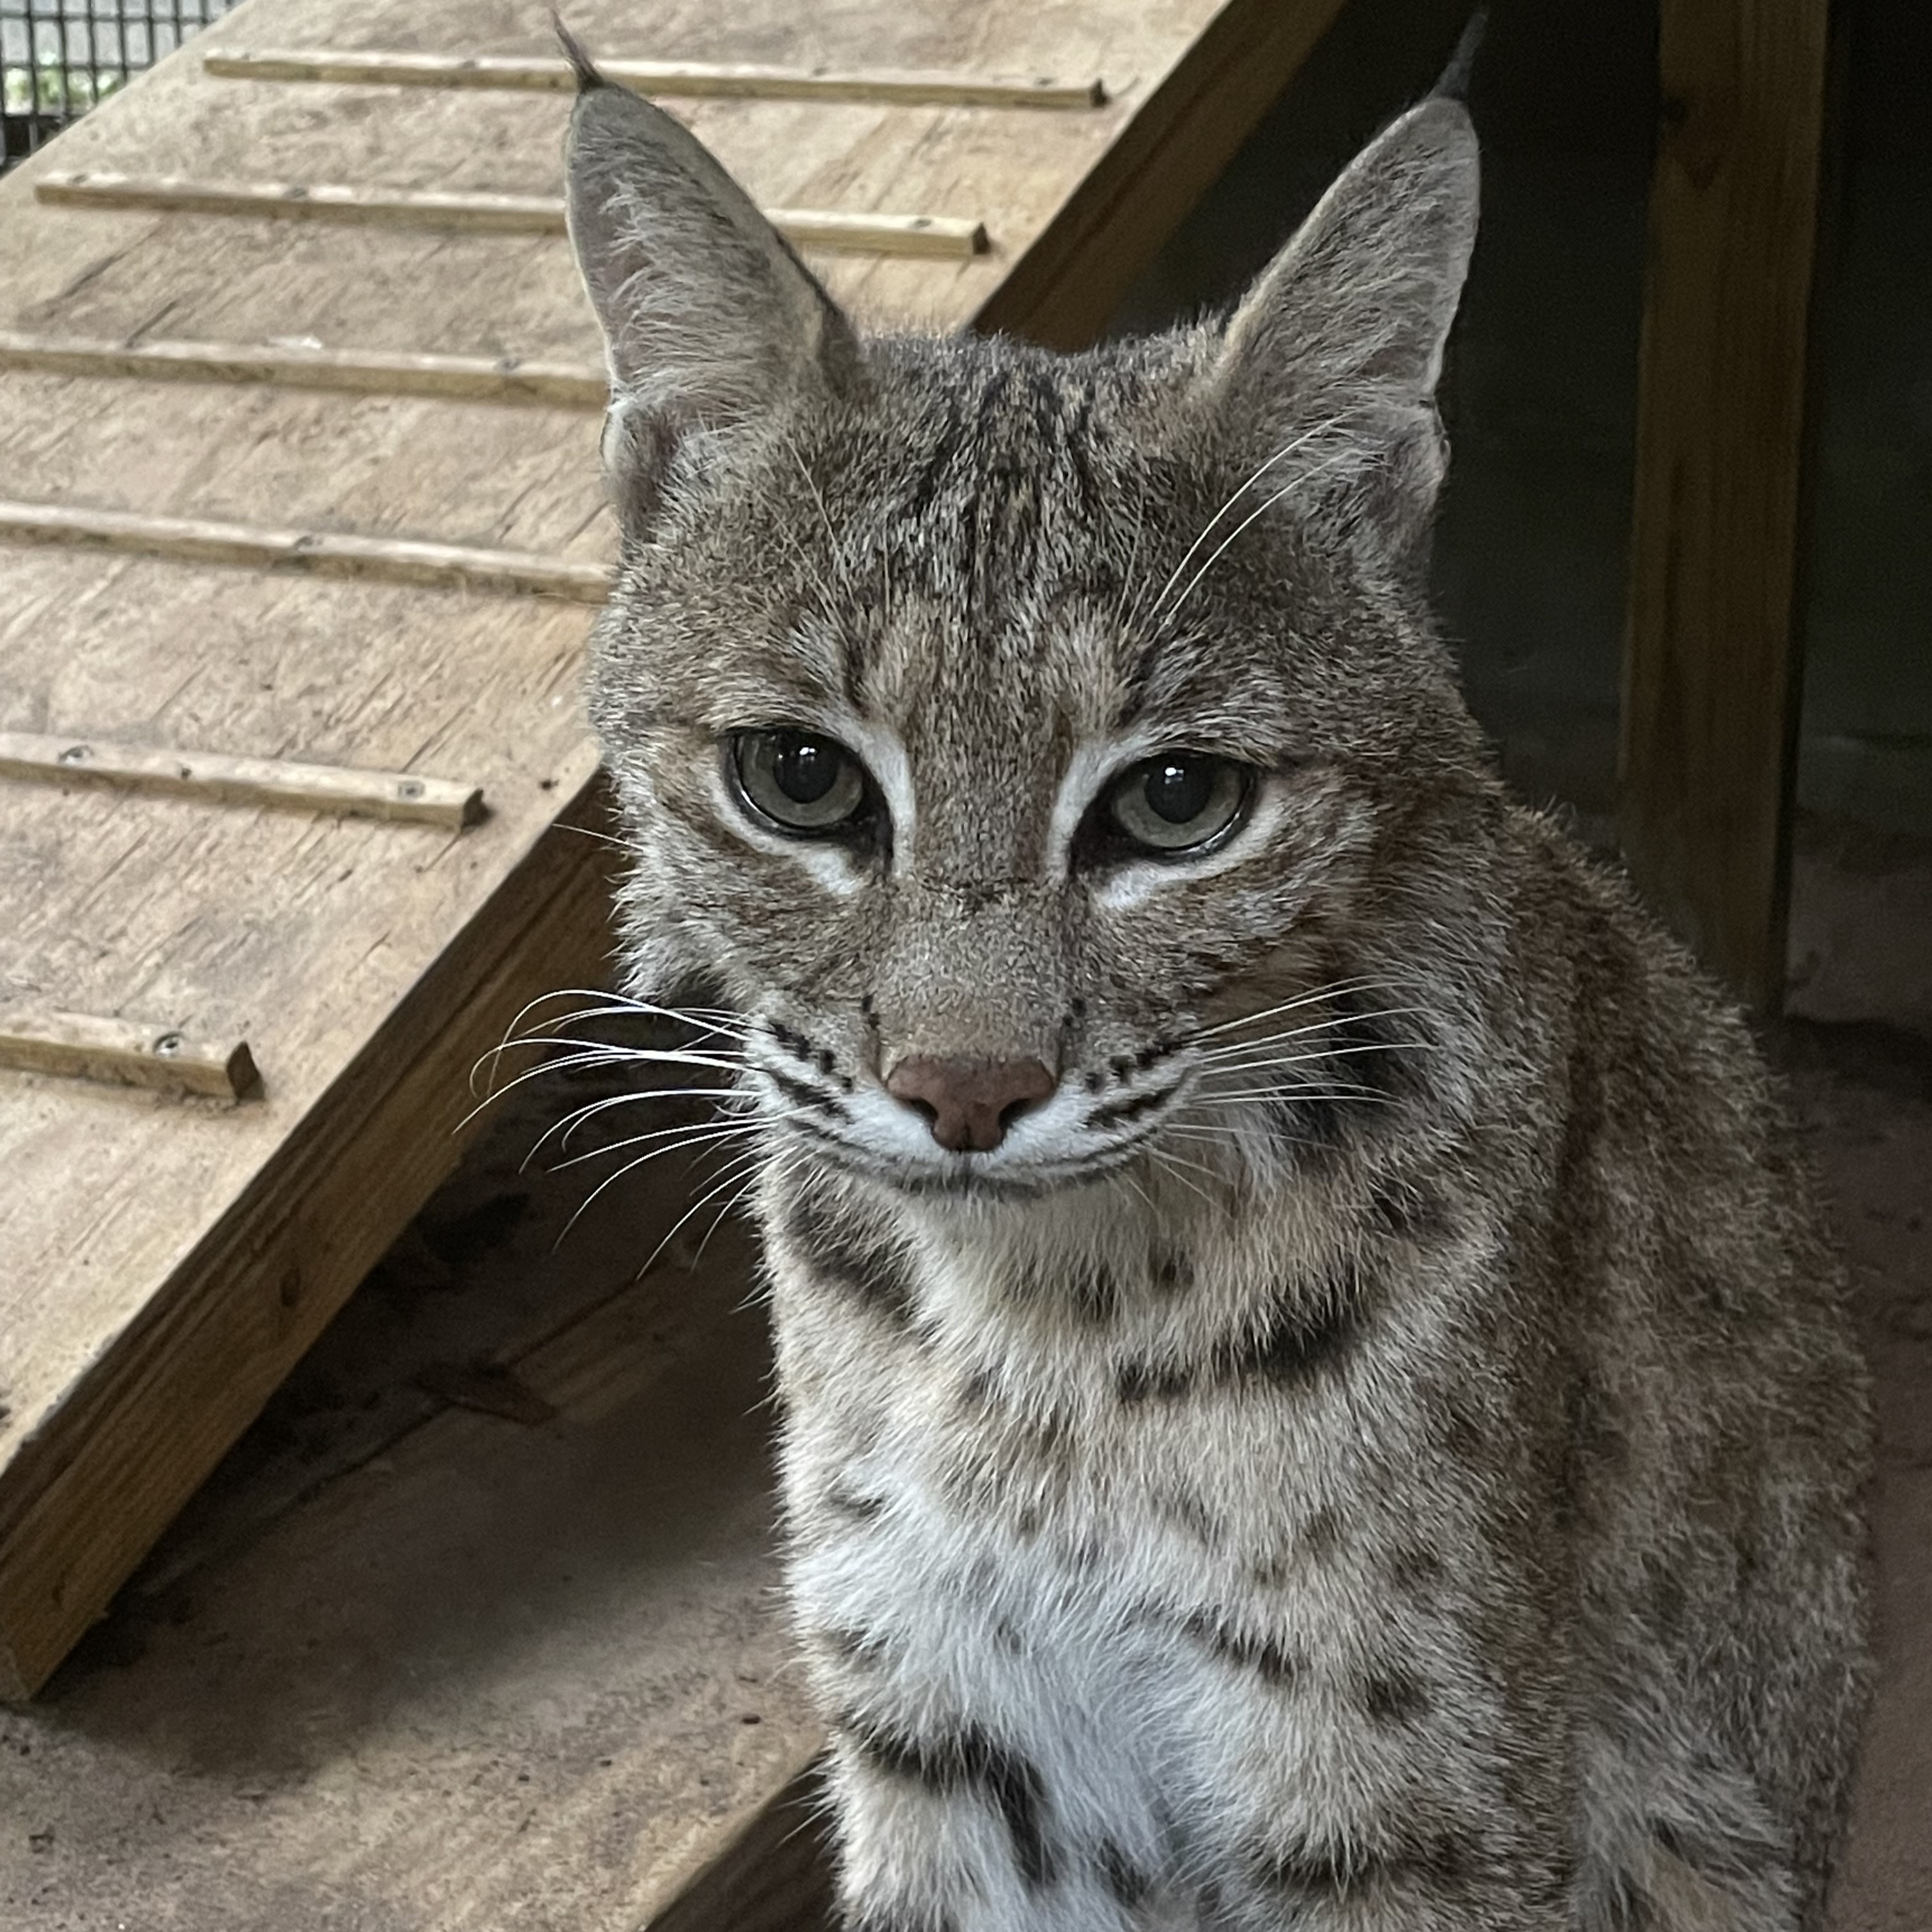 Abby, an 8 year old bobcat (Lynx rufus) housed at Jacksonville Zoo and Gardens, photo by Jessica Stull